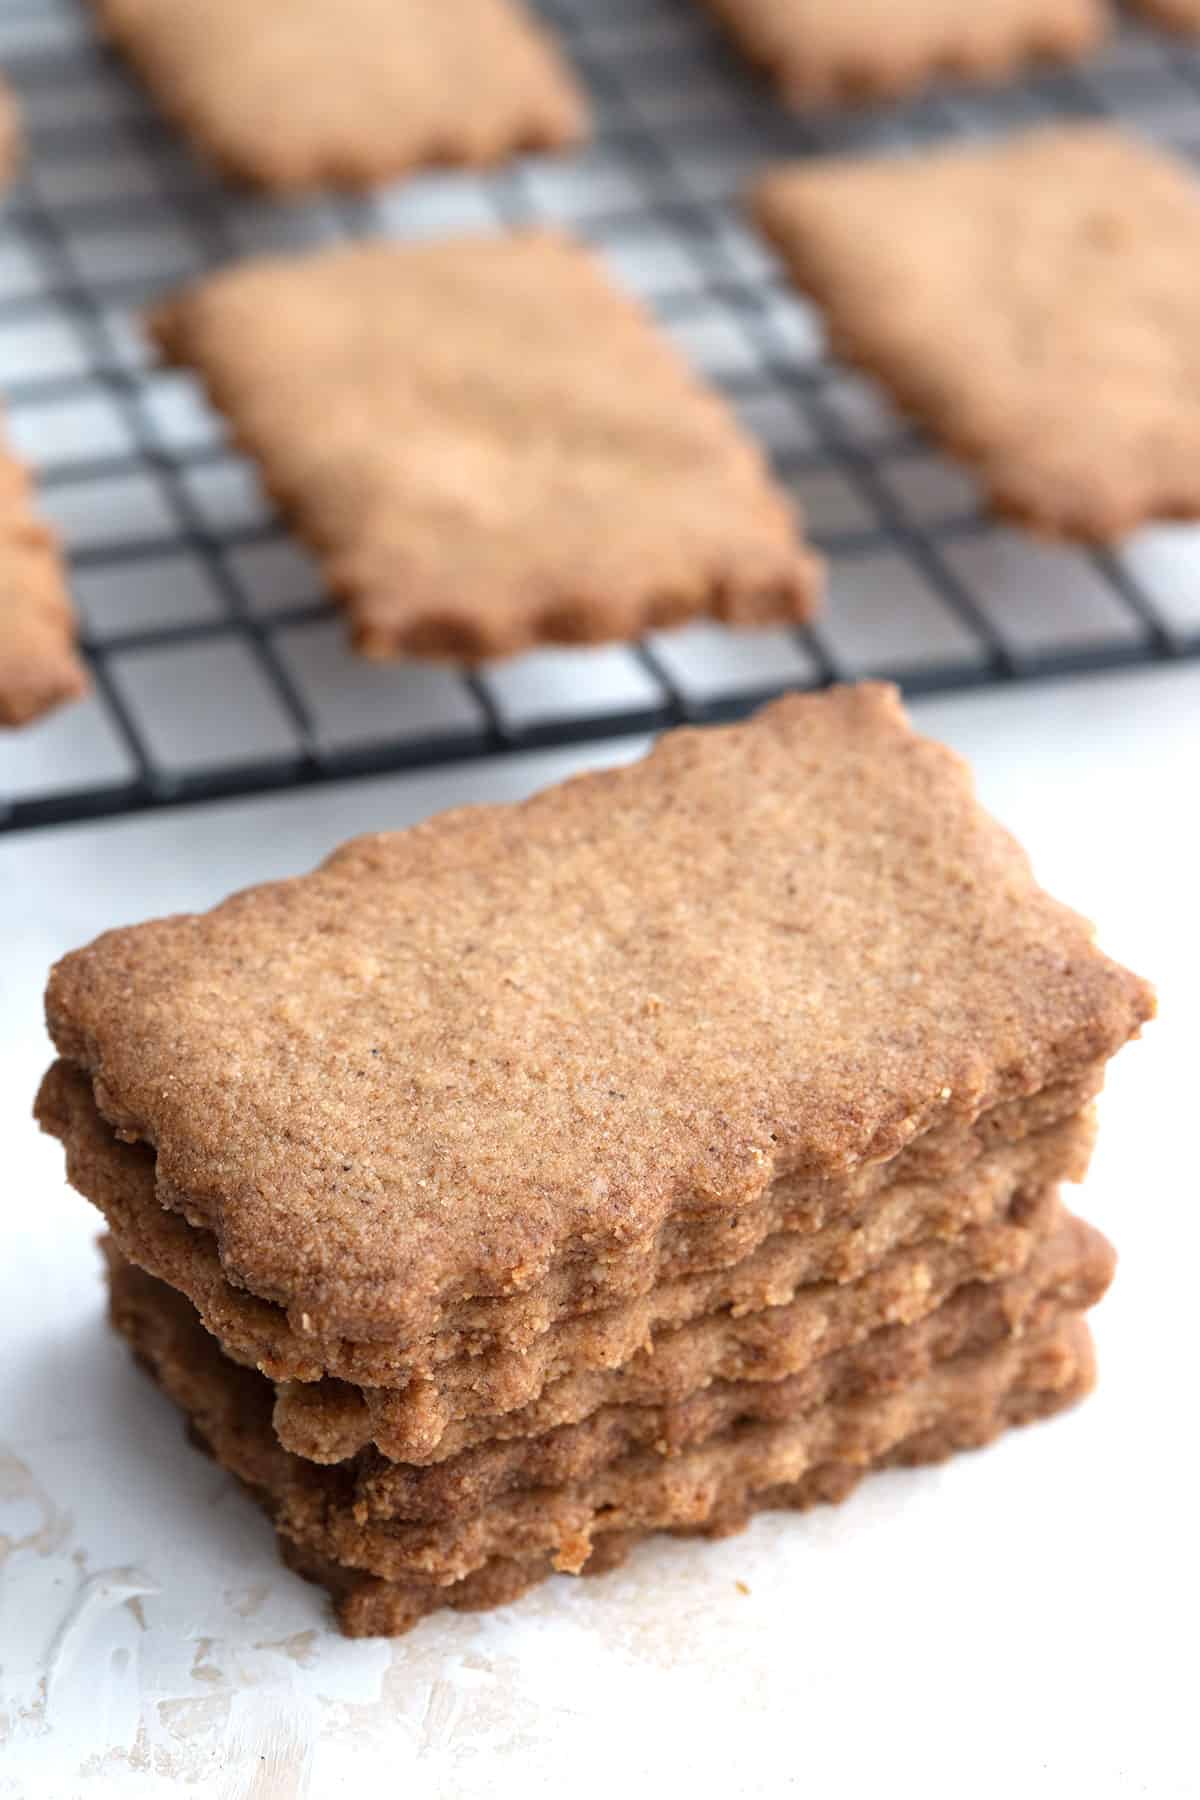 https://alldayidreamaboutfood.com/wp-content/uploads/2021/11/Keto-Speculoos-Cookies.jpg